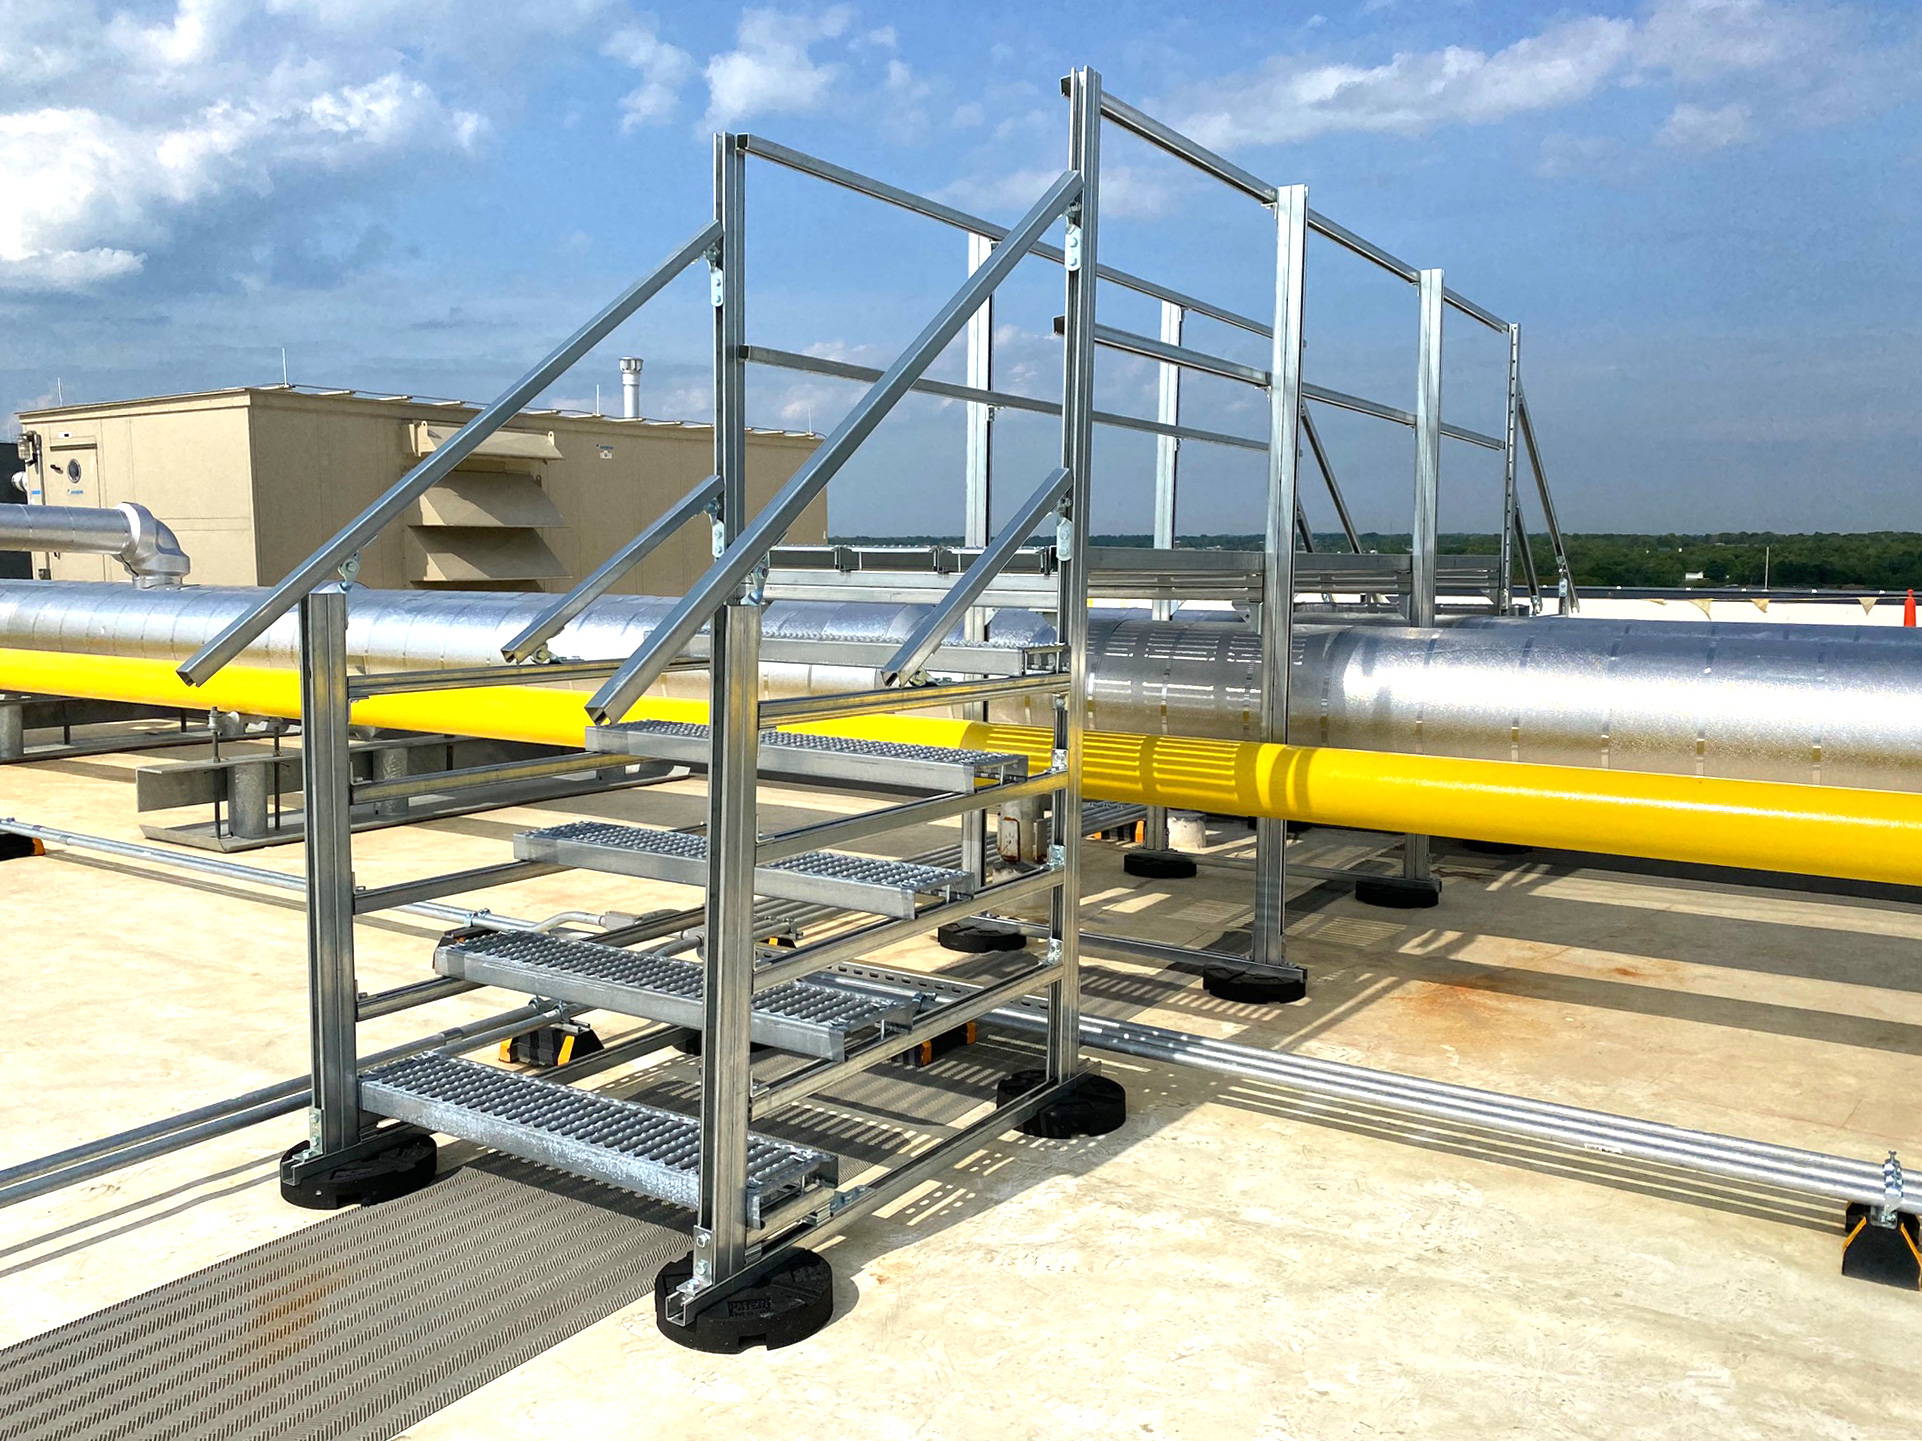 Unipier rooftop supports are ideal for Unistrut crossovers, allowing easy access over pipes and conduit.